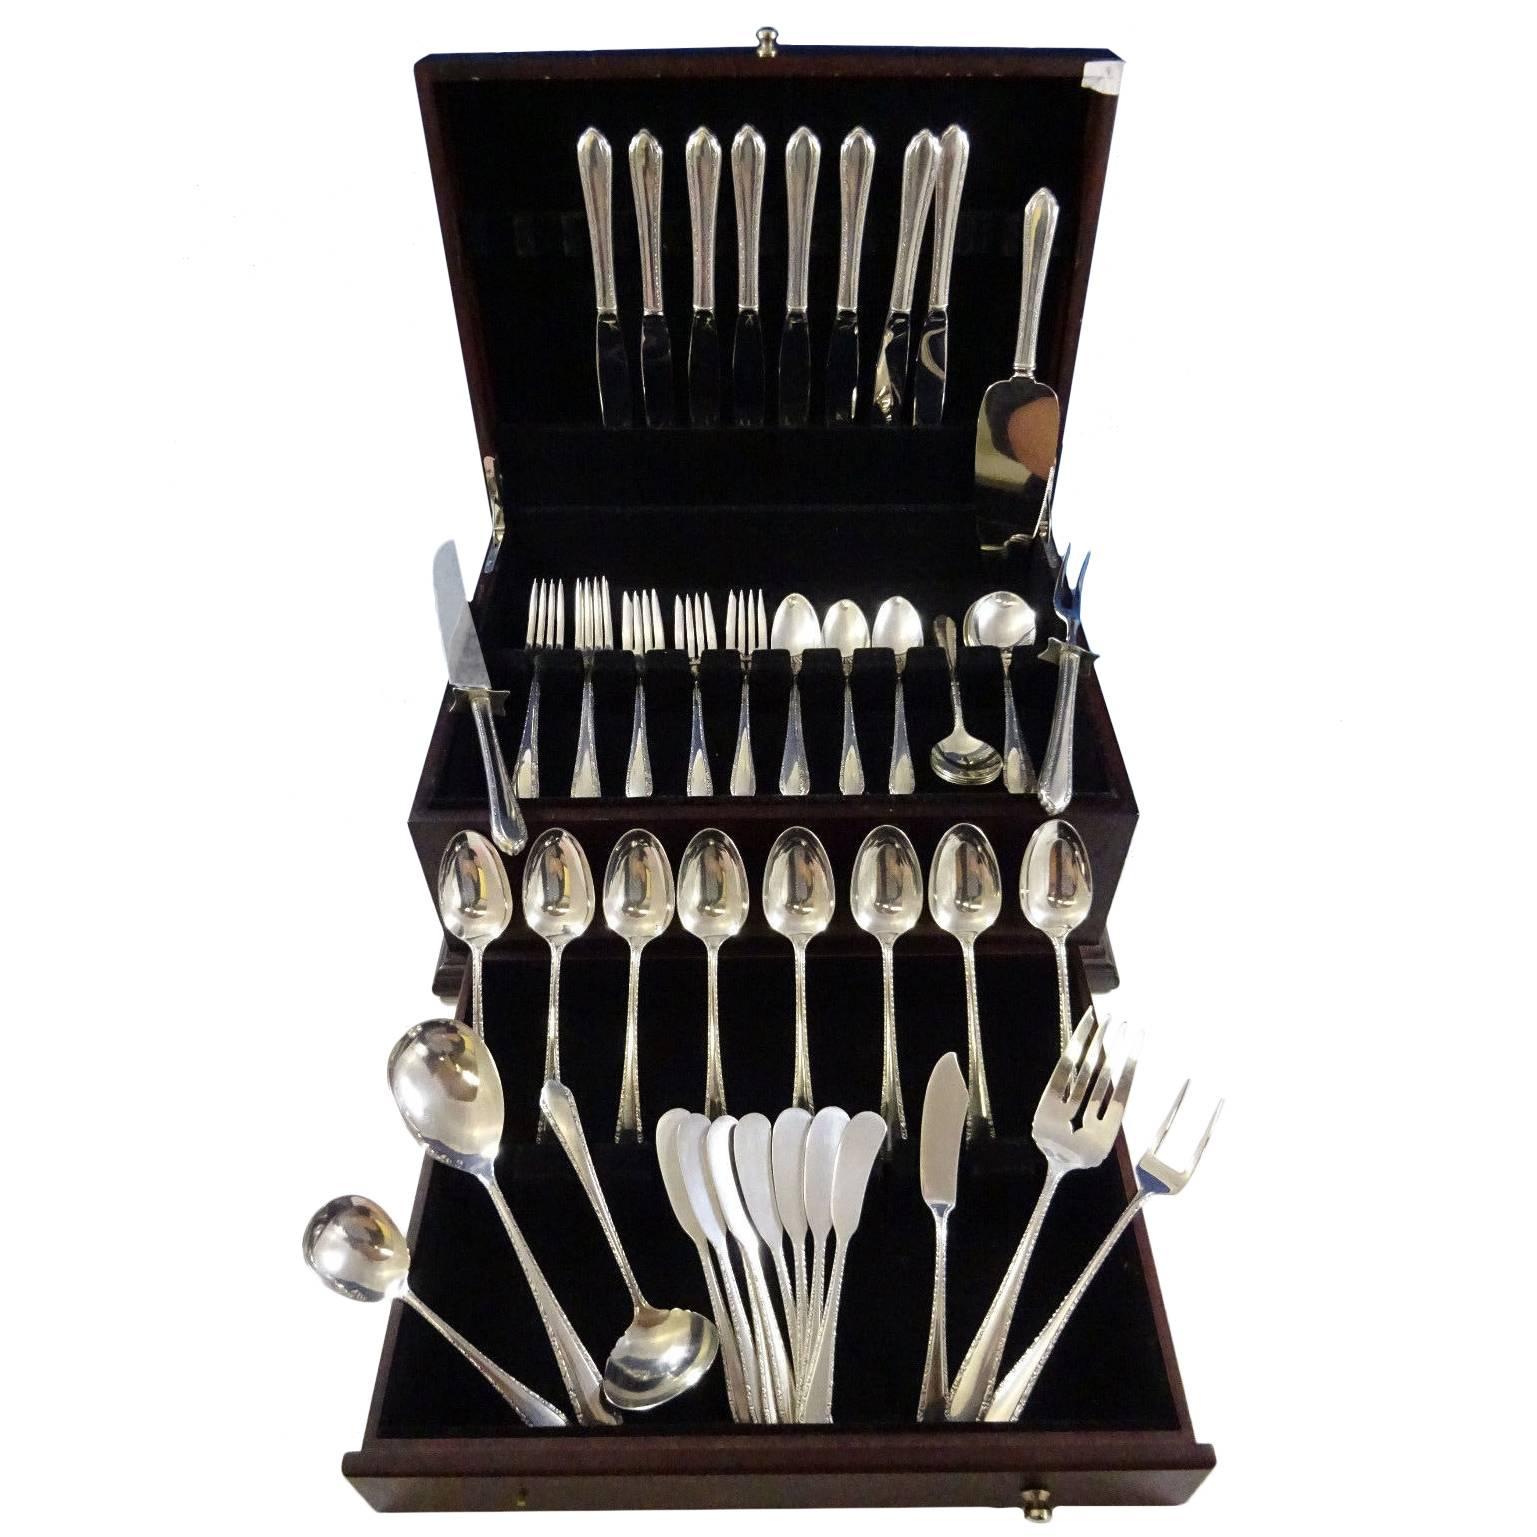 Wildflower by Royal Crest sterling silver flatware set of 65 pieces. This set includes:

Eight knives, 9 1/8